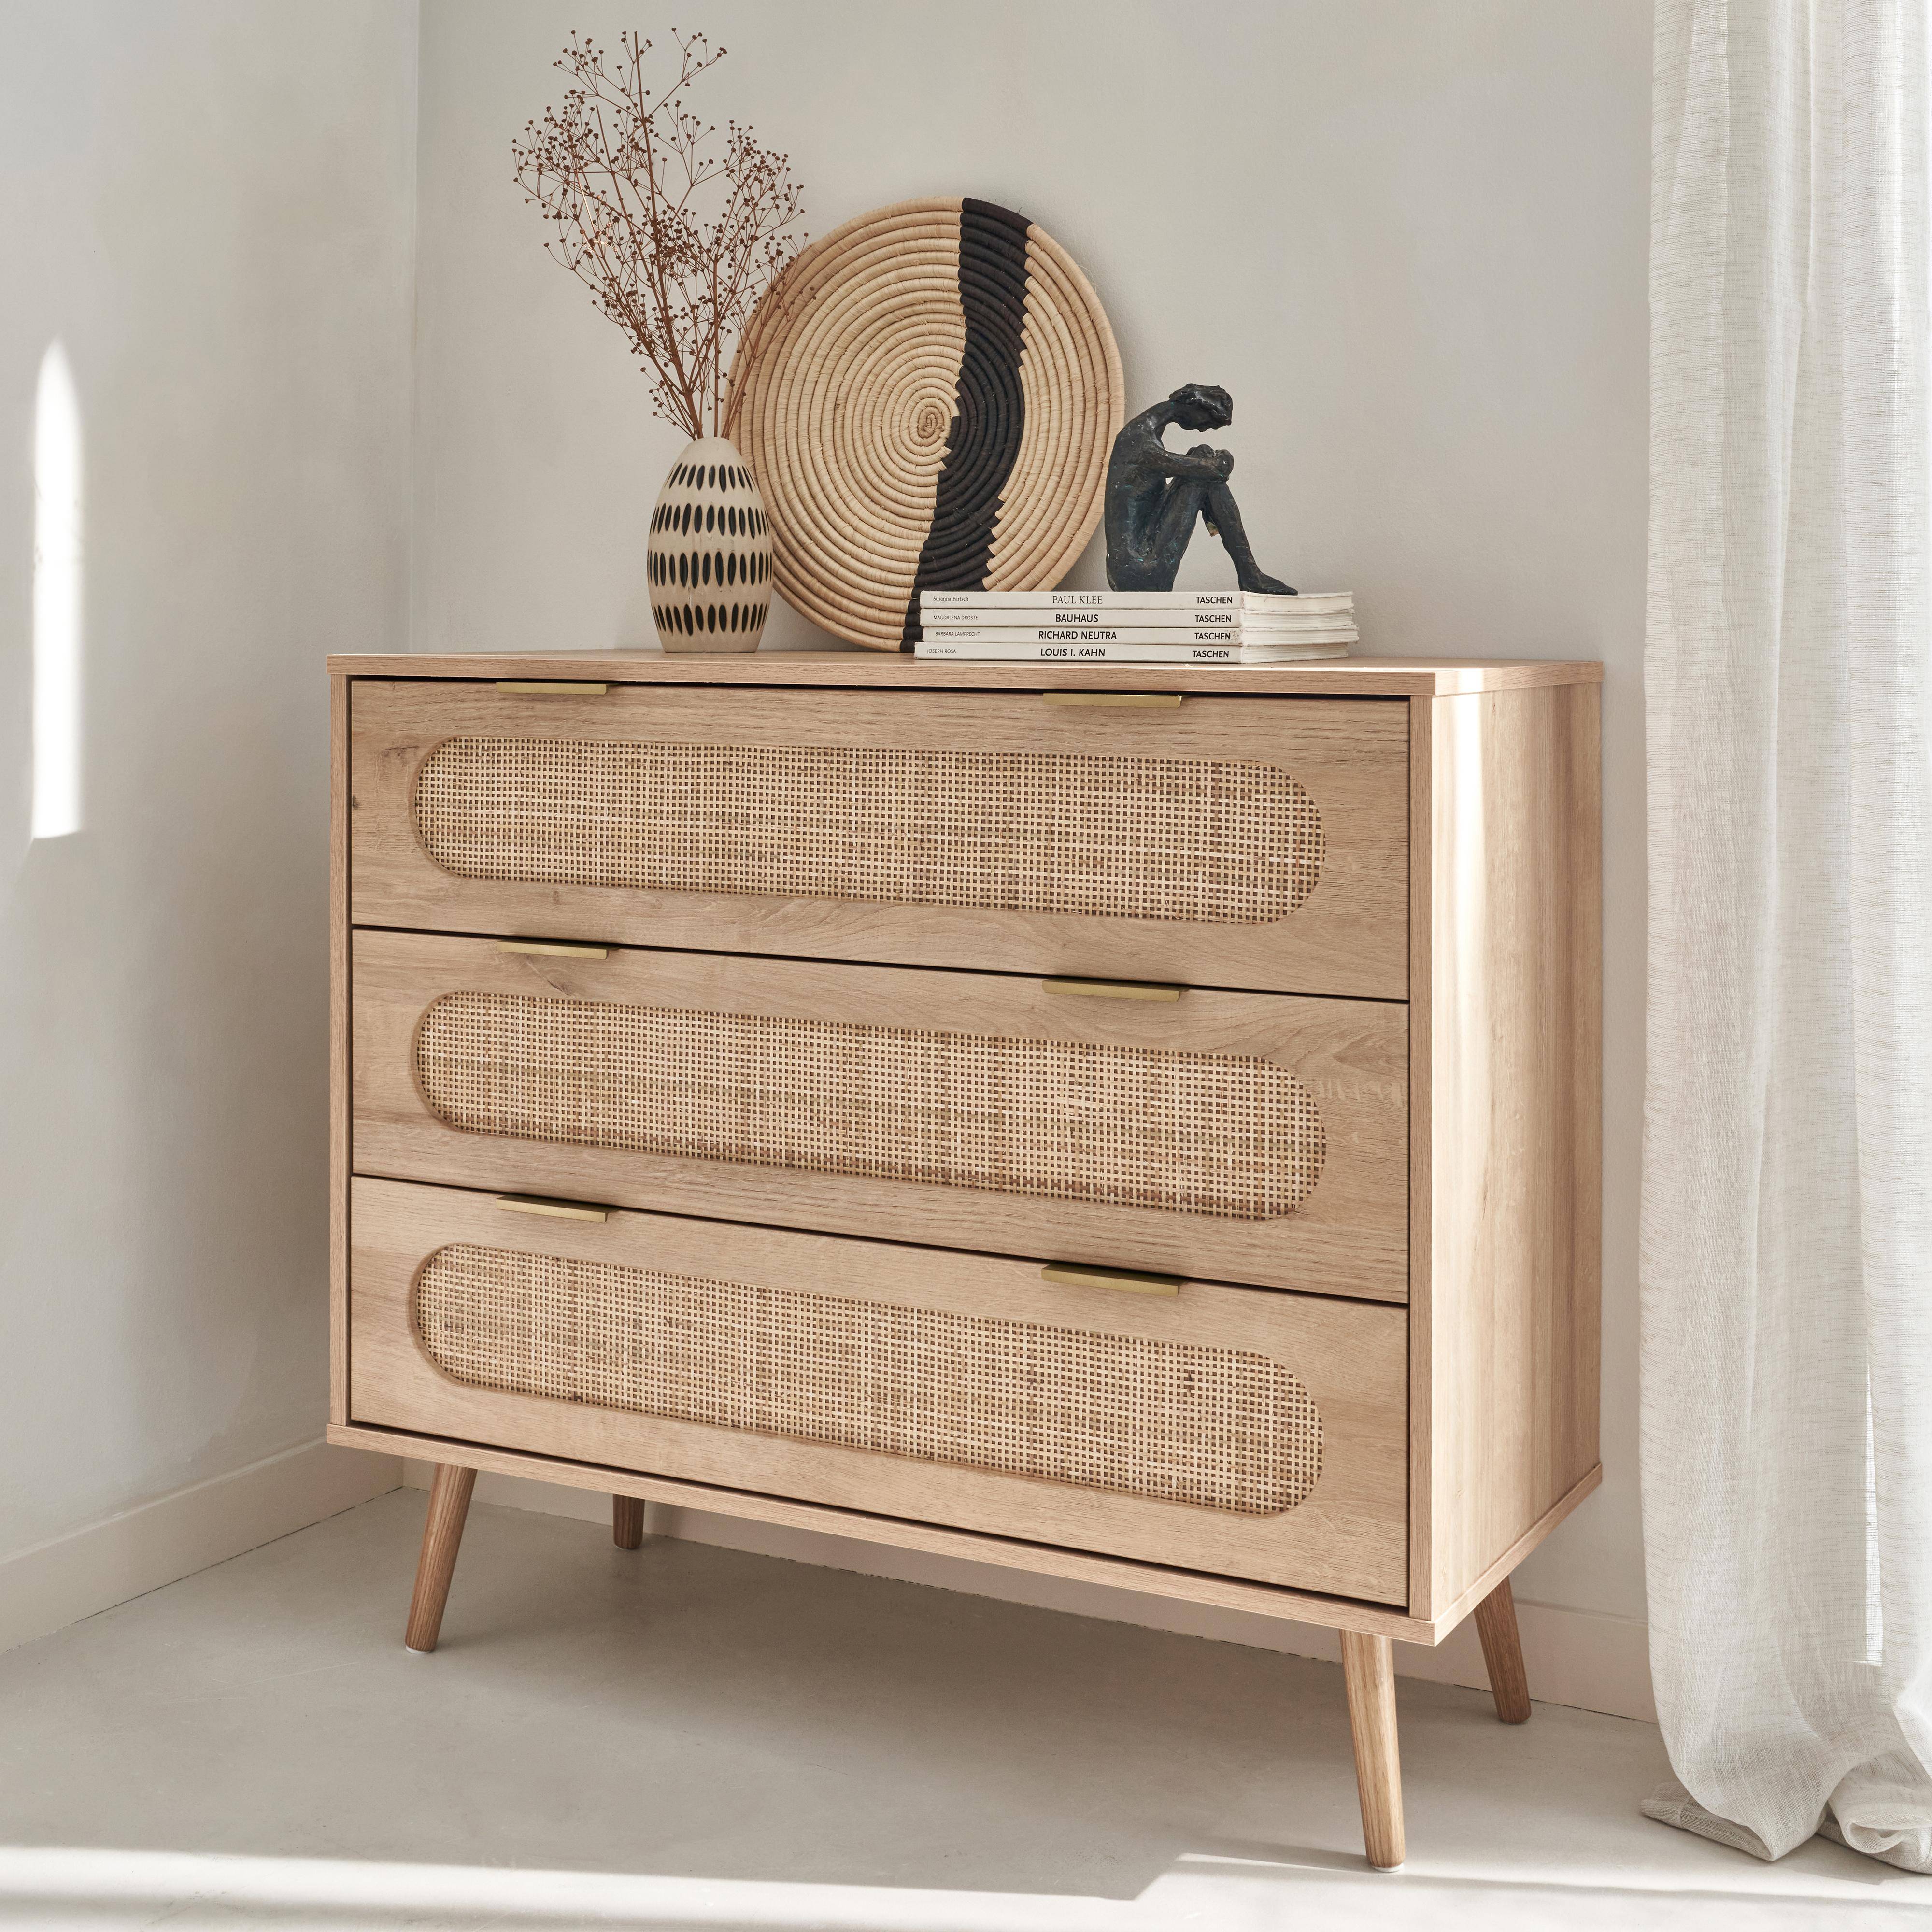 Chest of drawers, Eva, wood decor and rounded cane, 3 drawers L 90 x W 39 x H 79cm,sweeek,Photo2